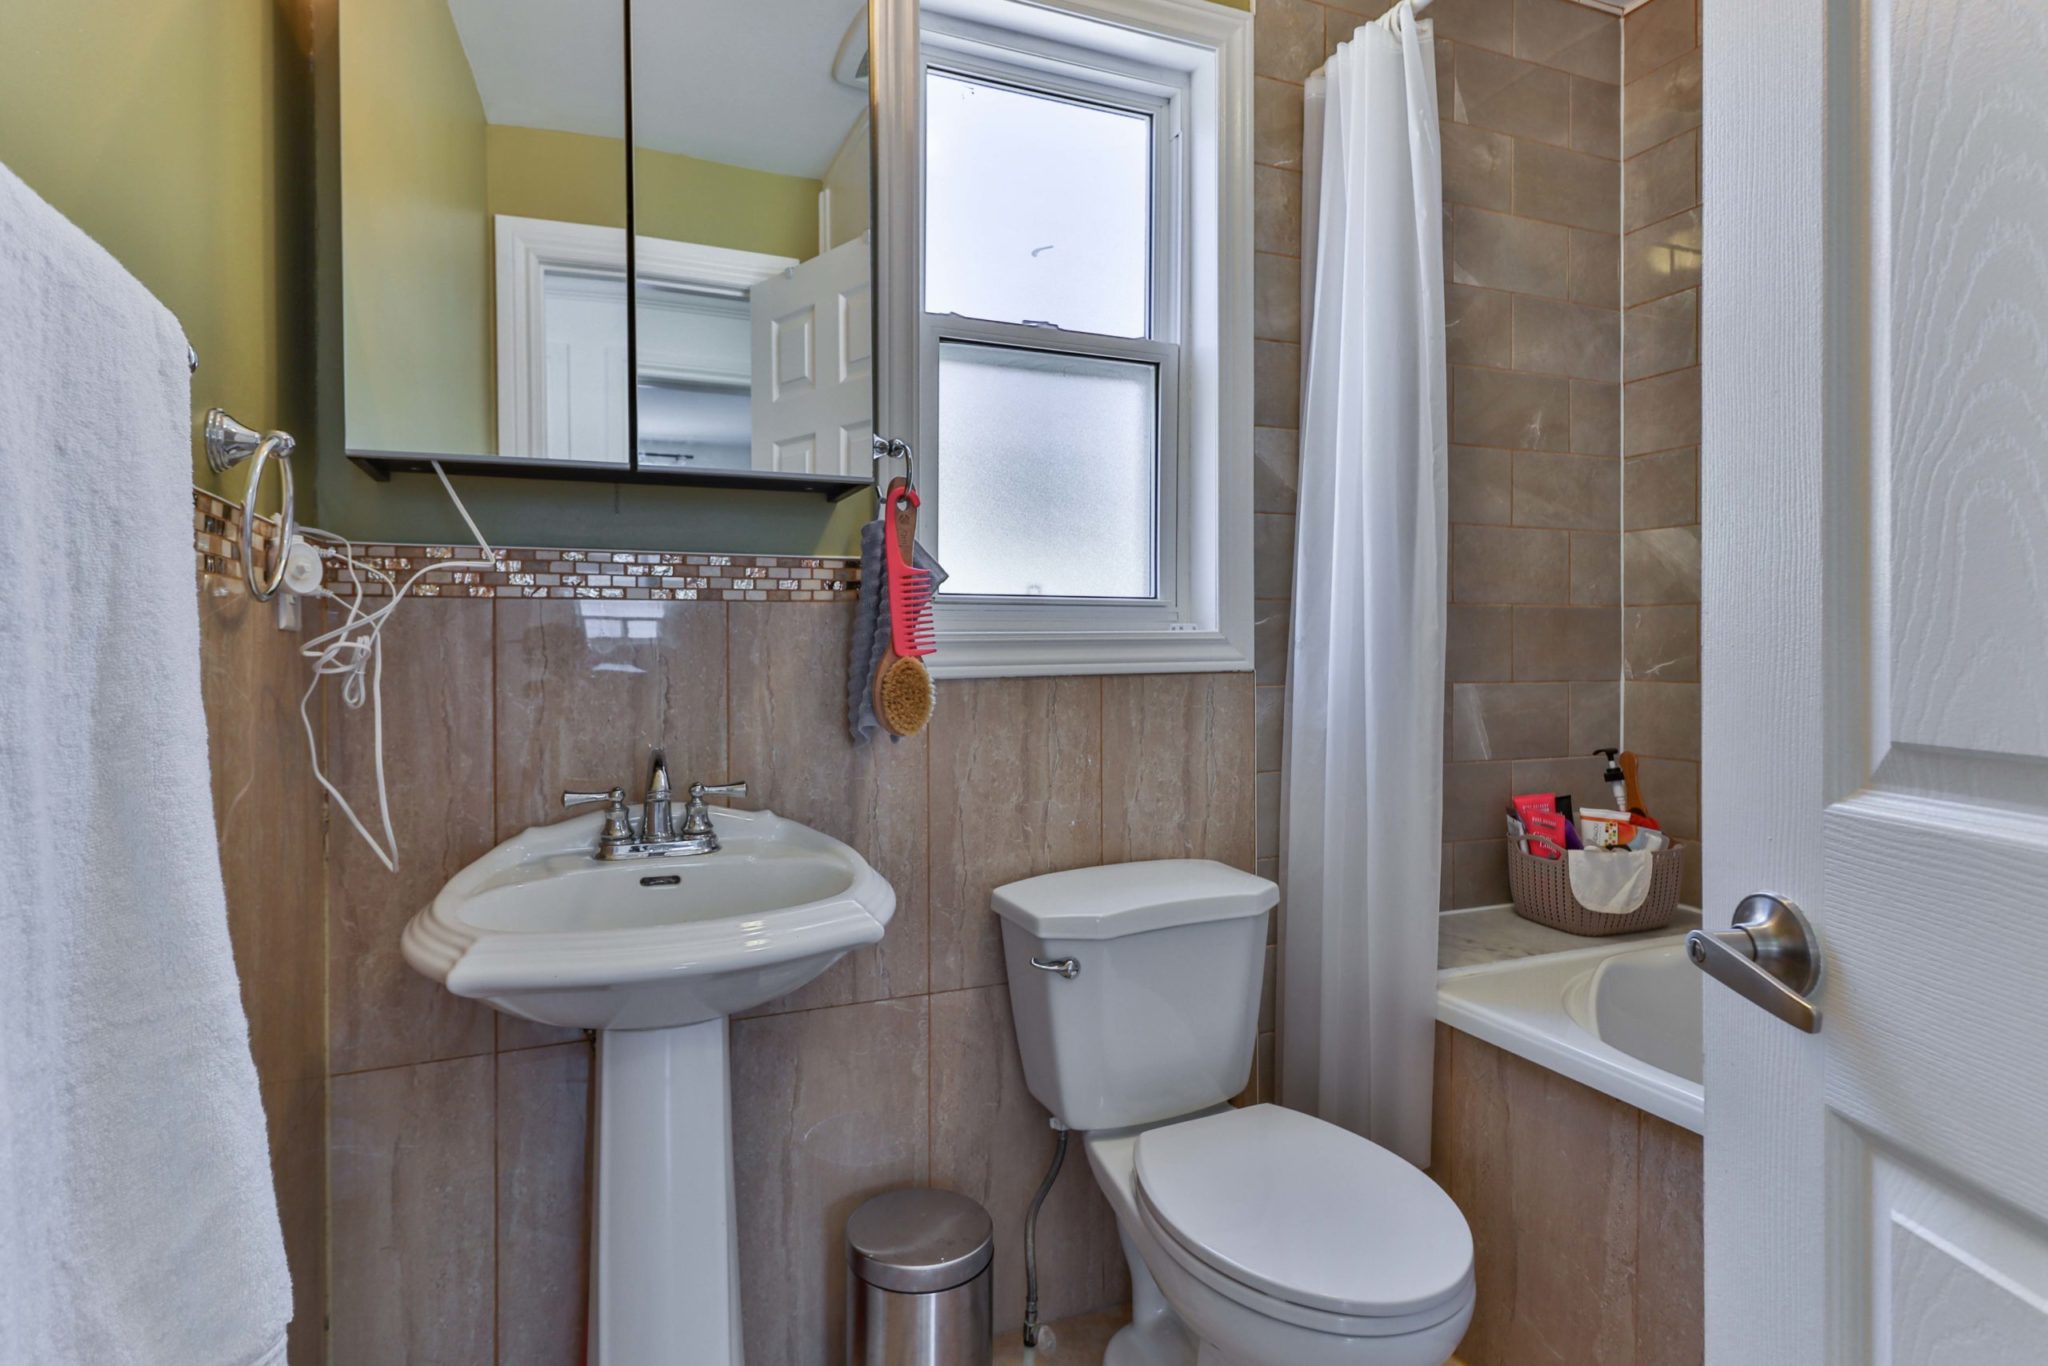 Newly renovated bathroom with beige-brown tiles, white sink, toilet and soaker tub.